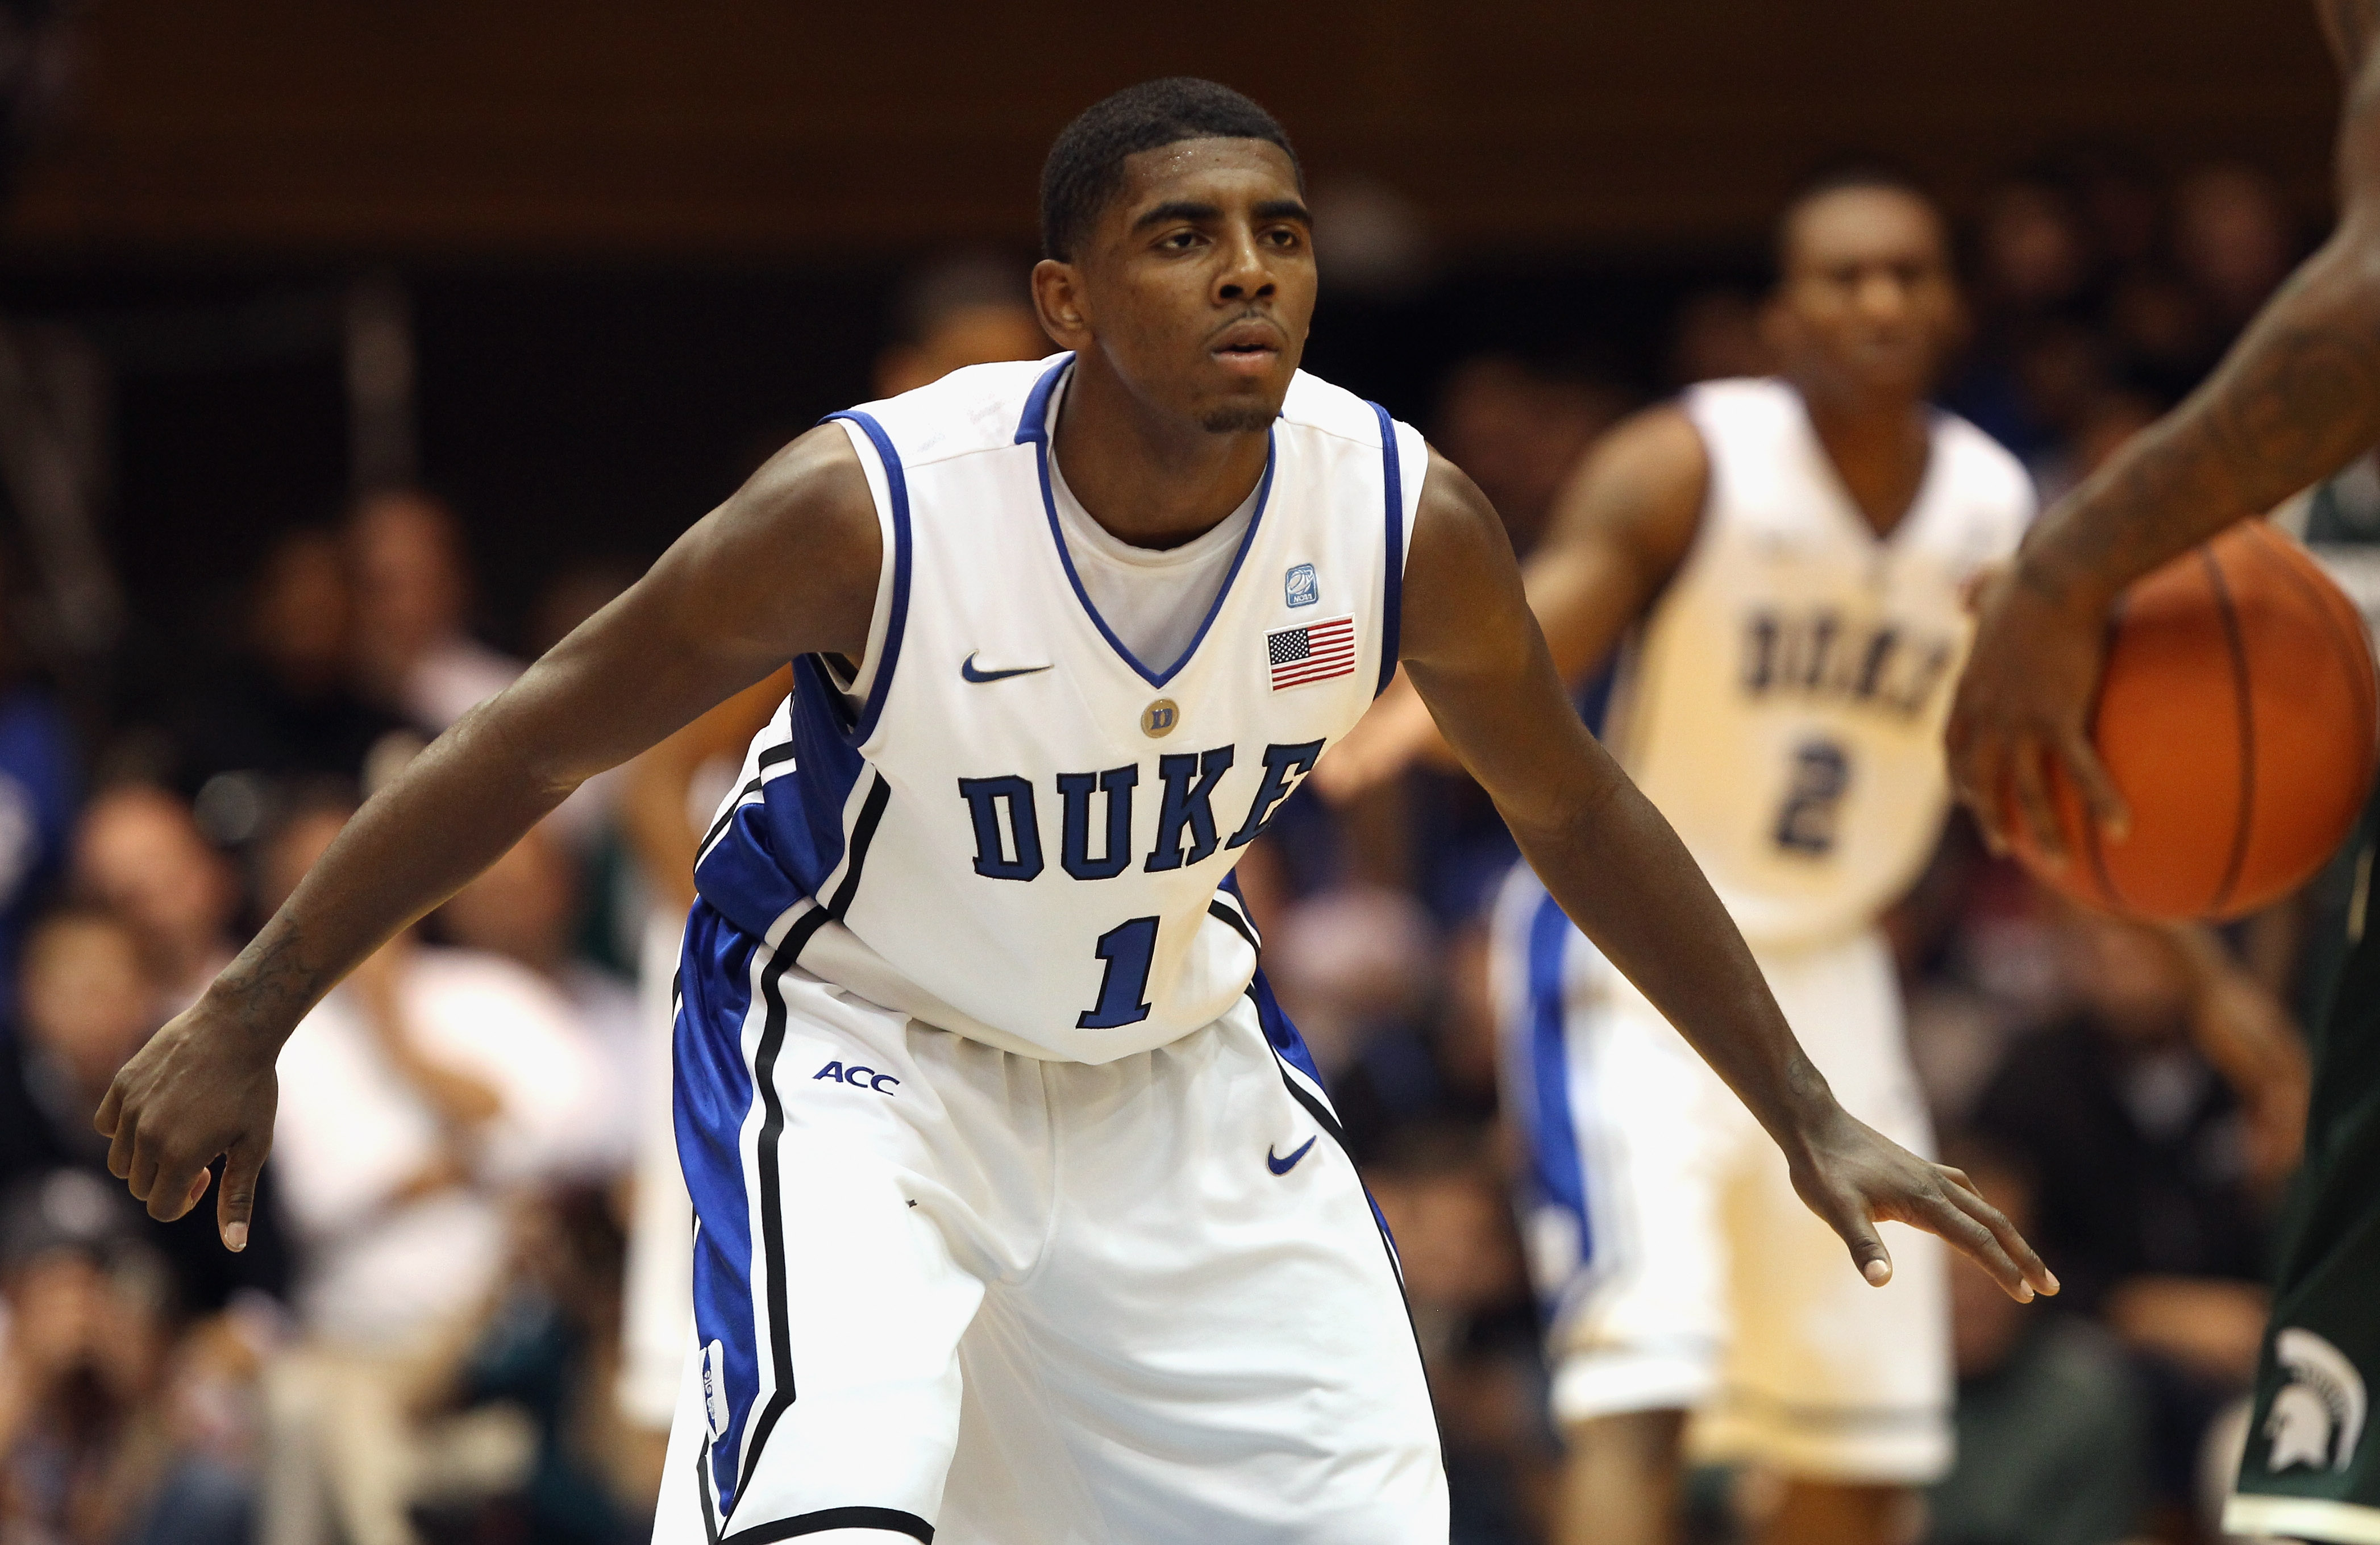 DURHAM, NC - DECEMBER 01:  Kyrie Irving #1 of the Duke Blue Devils watches on during their game against the Michigan State Spartans at Cameron Indoor Stadium on December 1, 2010 in Durham, North Carolina.  (Photo by Streeter Lecka/Getty Images)